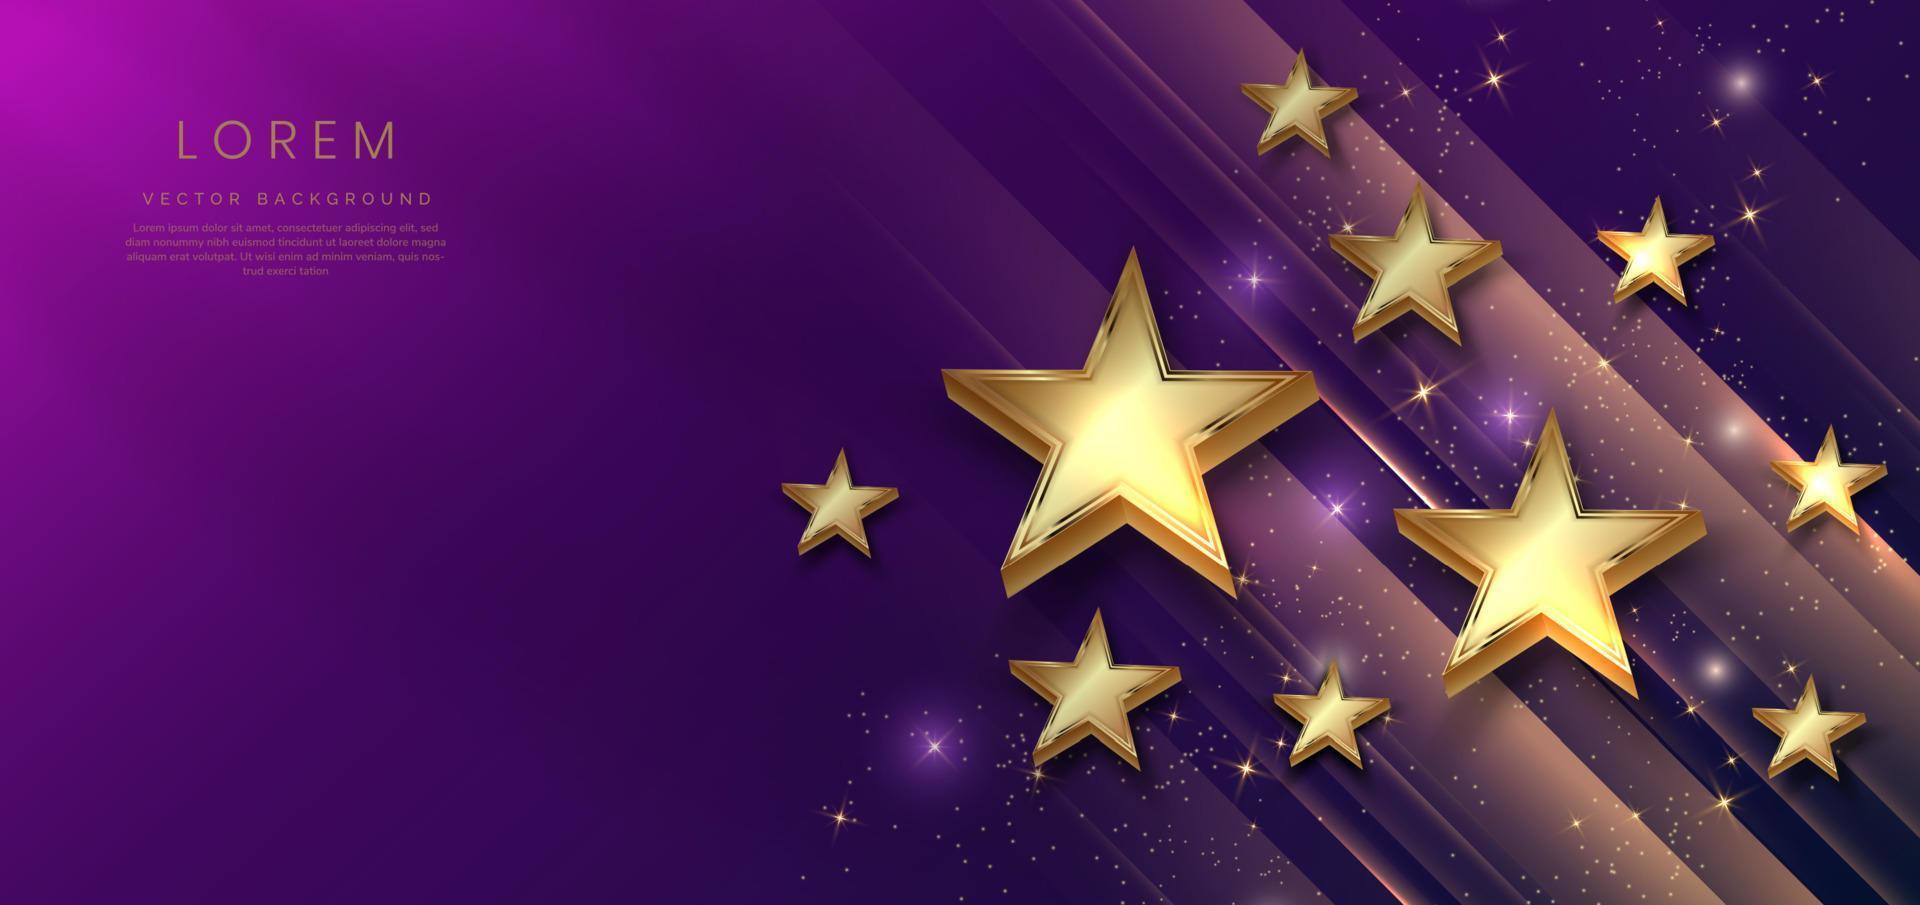 Abstract luxury golden stars on dark blue and purple background with lighting effect and spakle. Template premium award design. vector